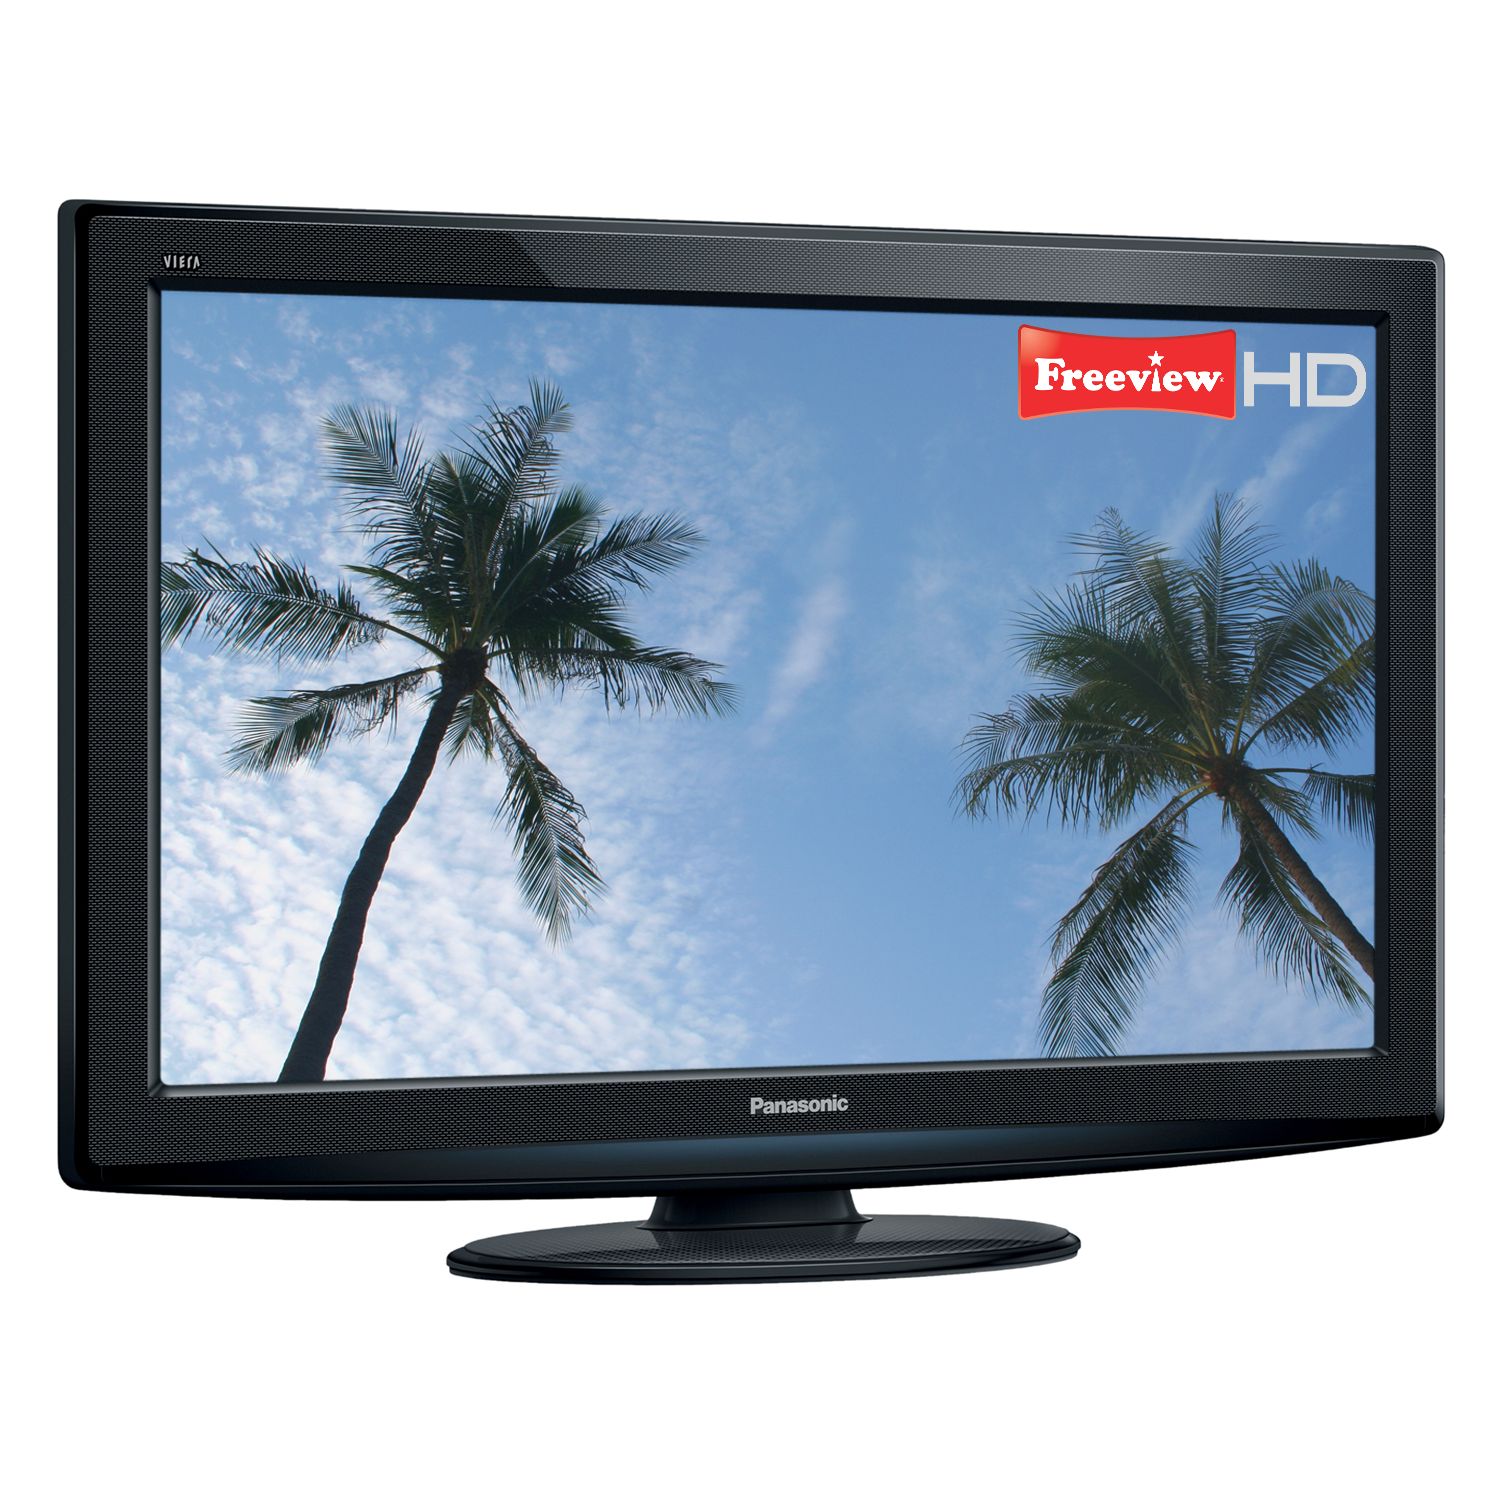 Panasonic Viera TX-L32S20B LCD HD 1080p Digital Television, 32 Inch with Built-in Freeview HD at John Lewis